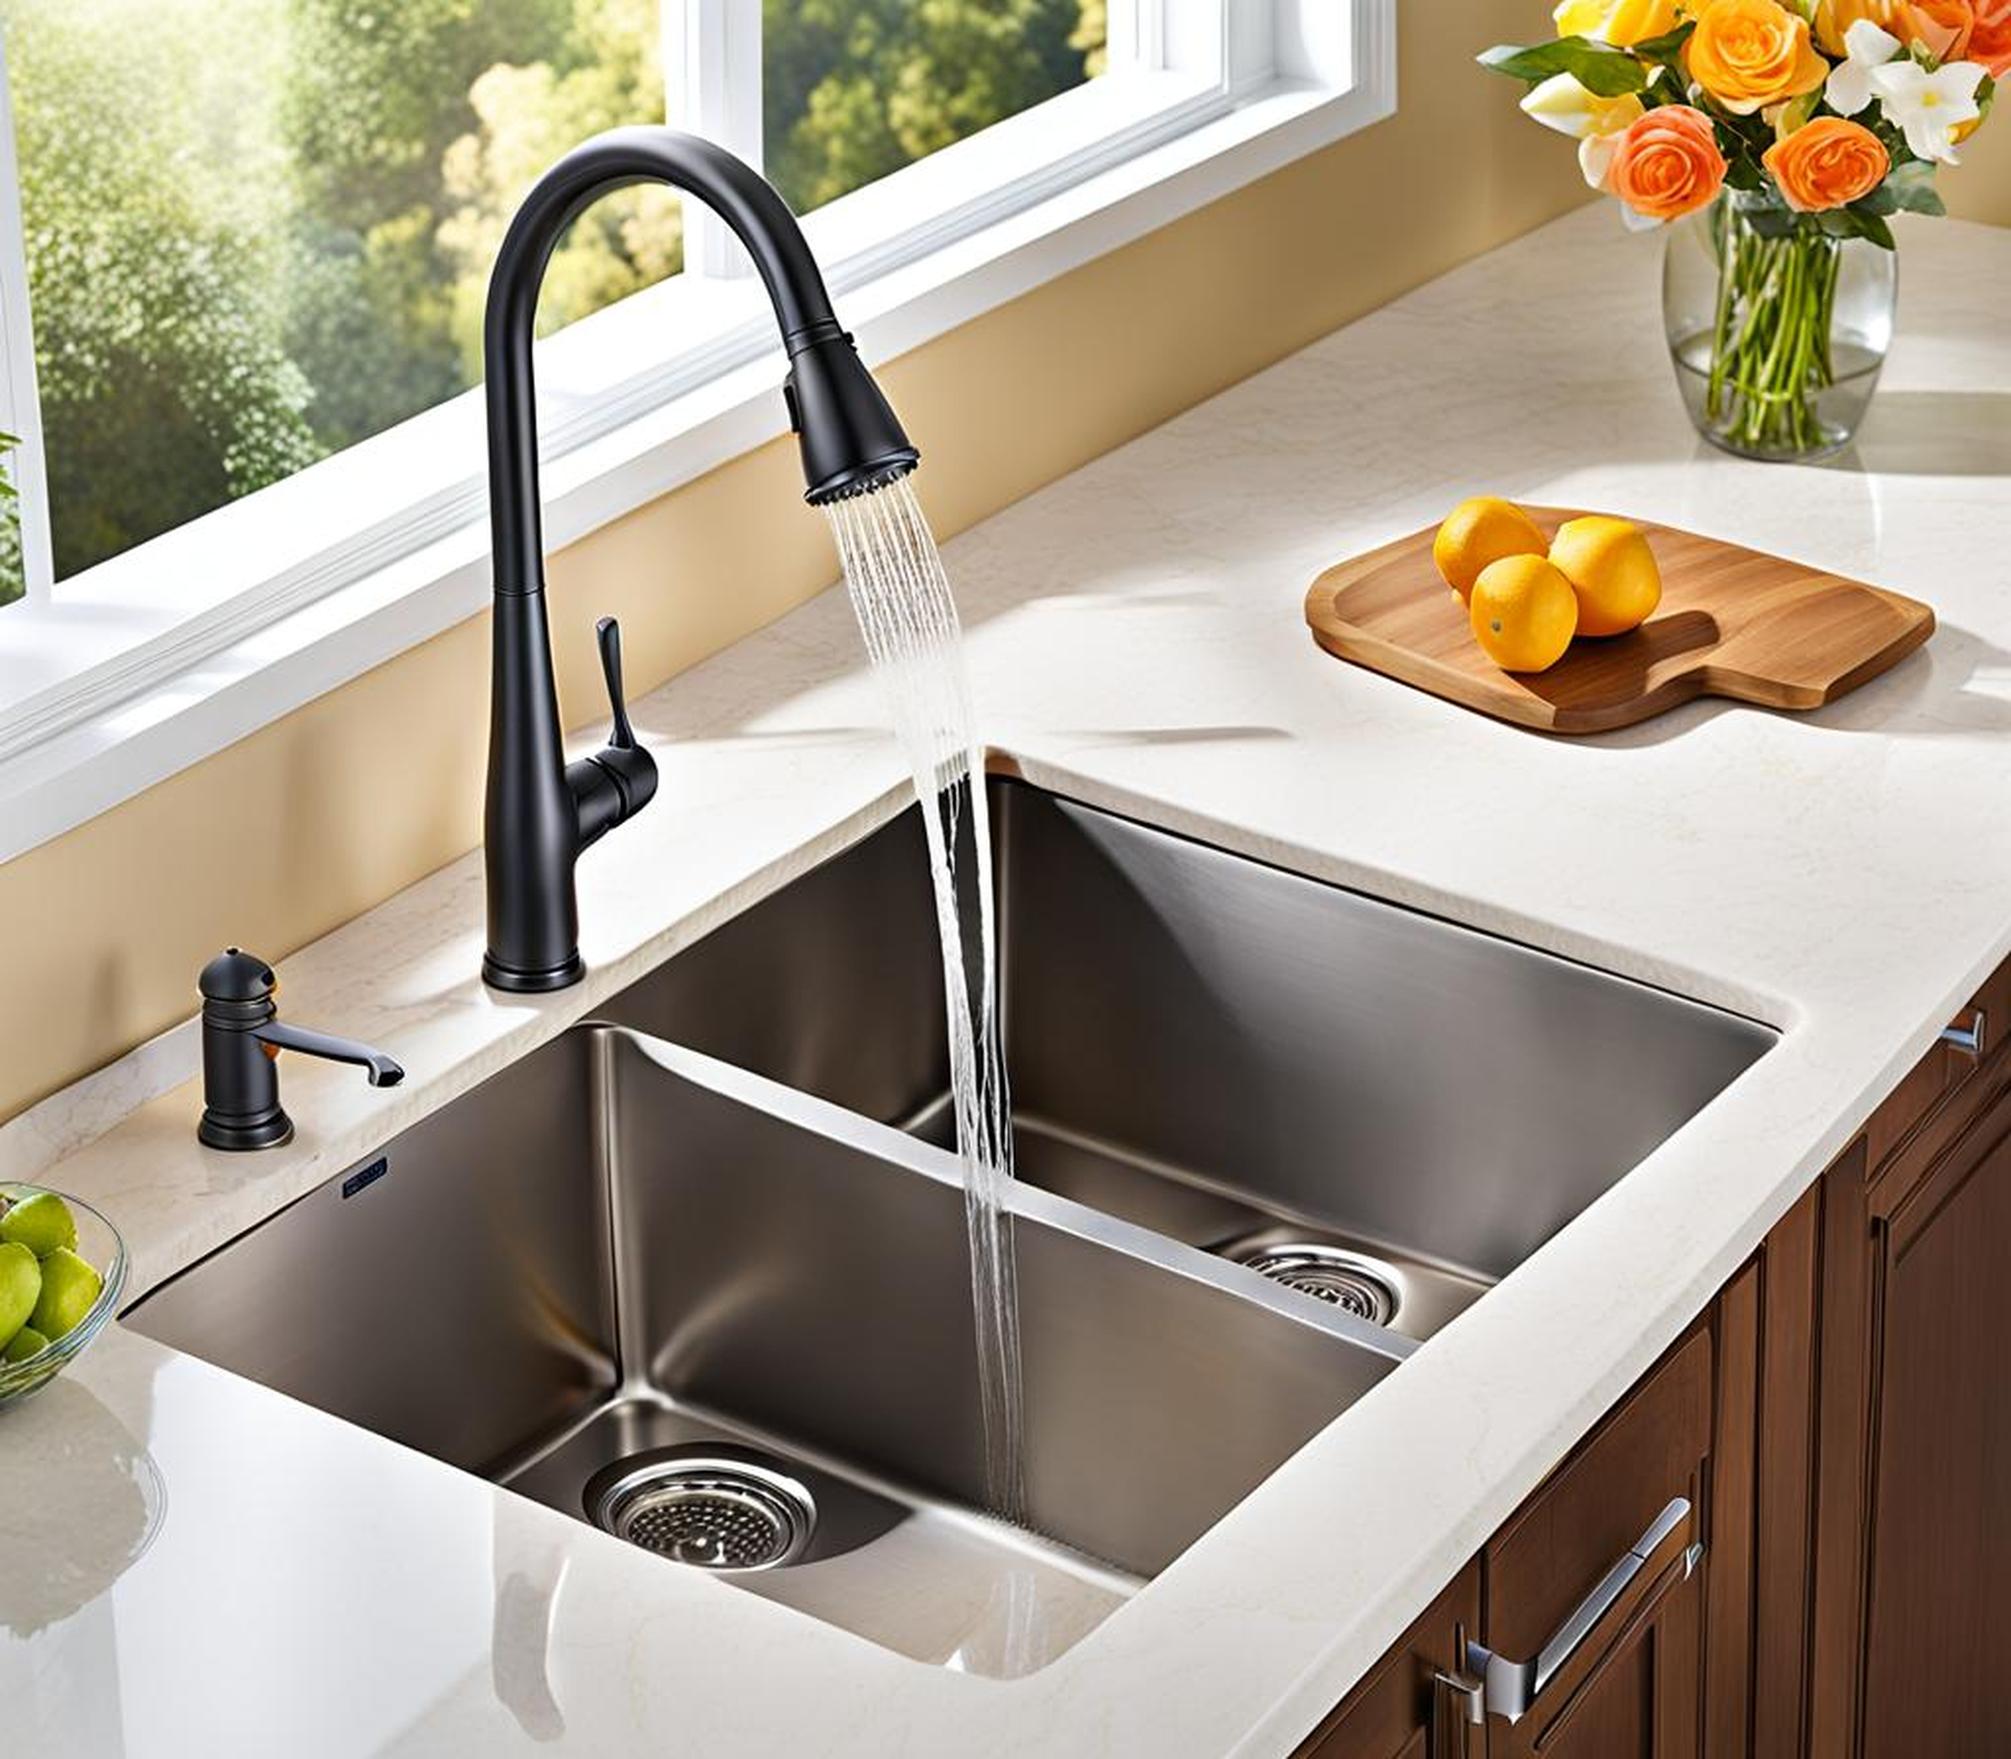 installing new kitchen faucet